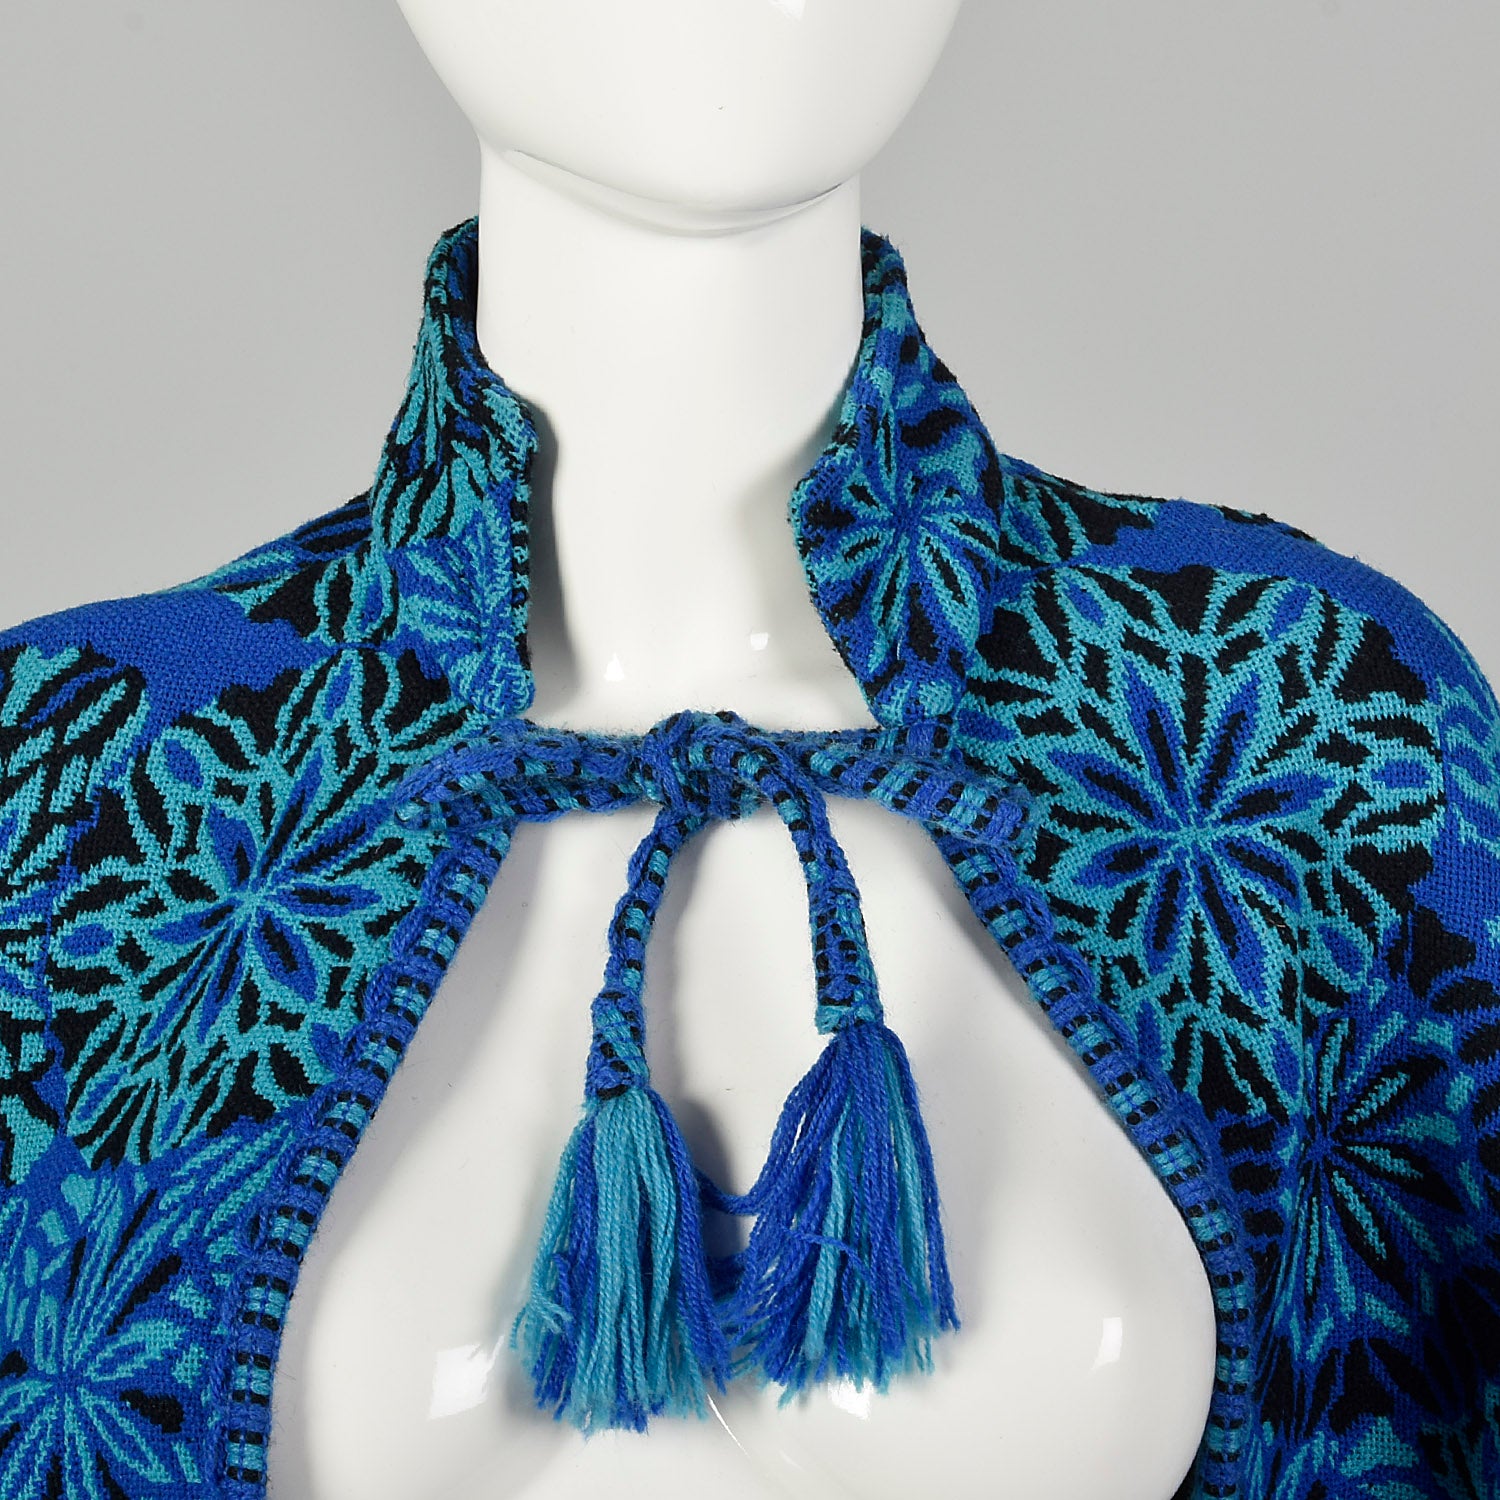 1970s Reversible Blue Floral Tapestry Cape